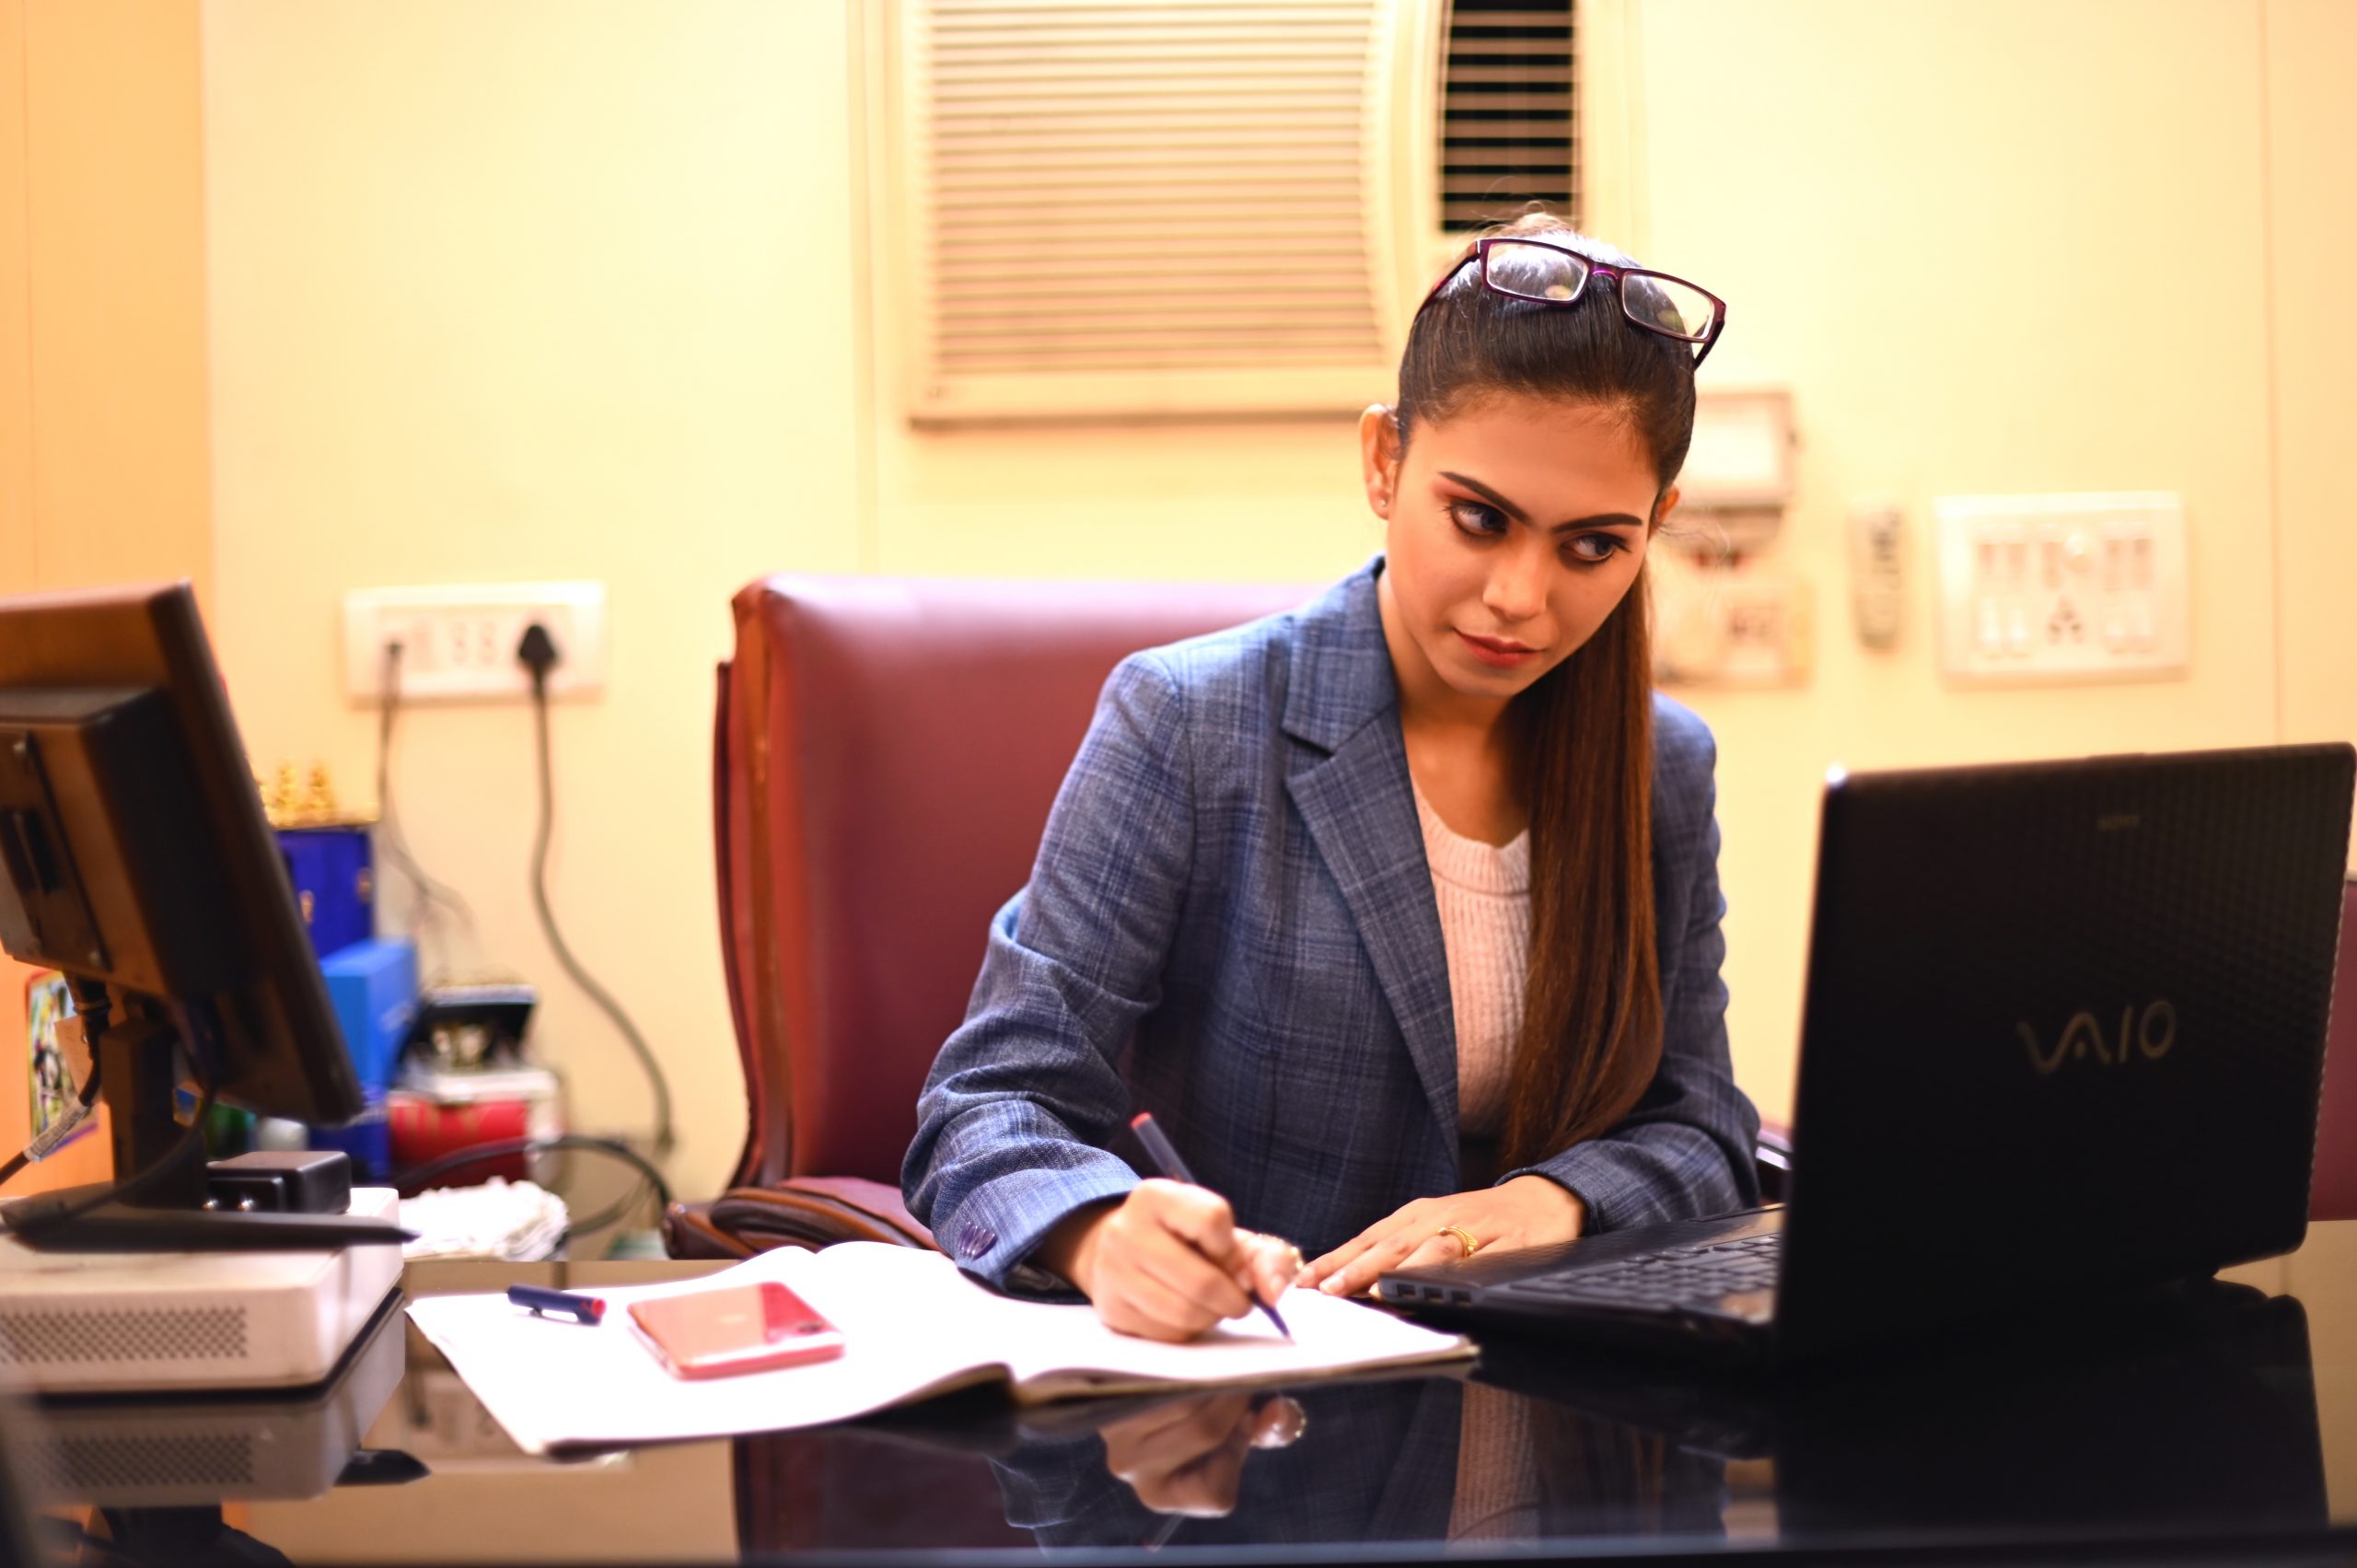 A girl working in office